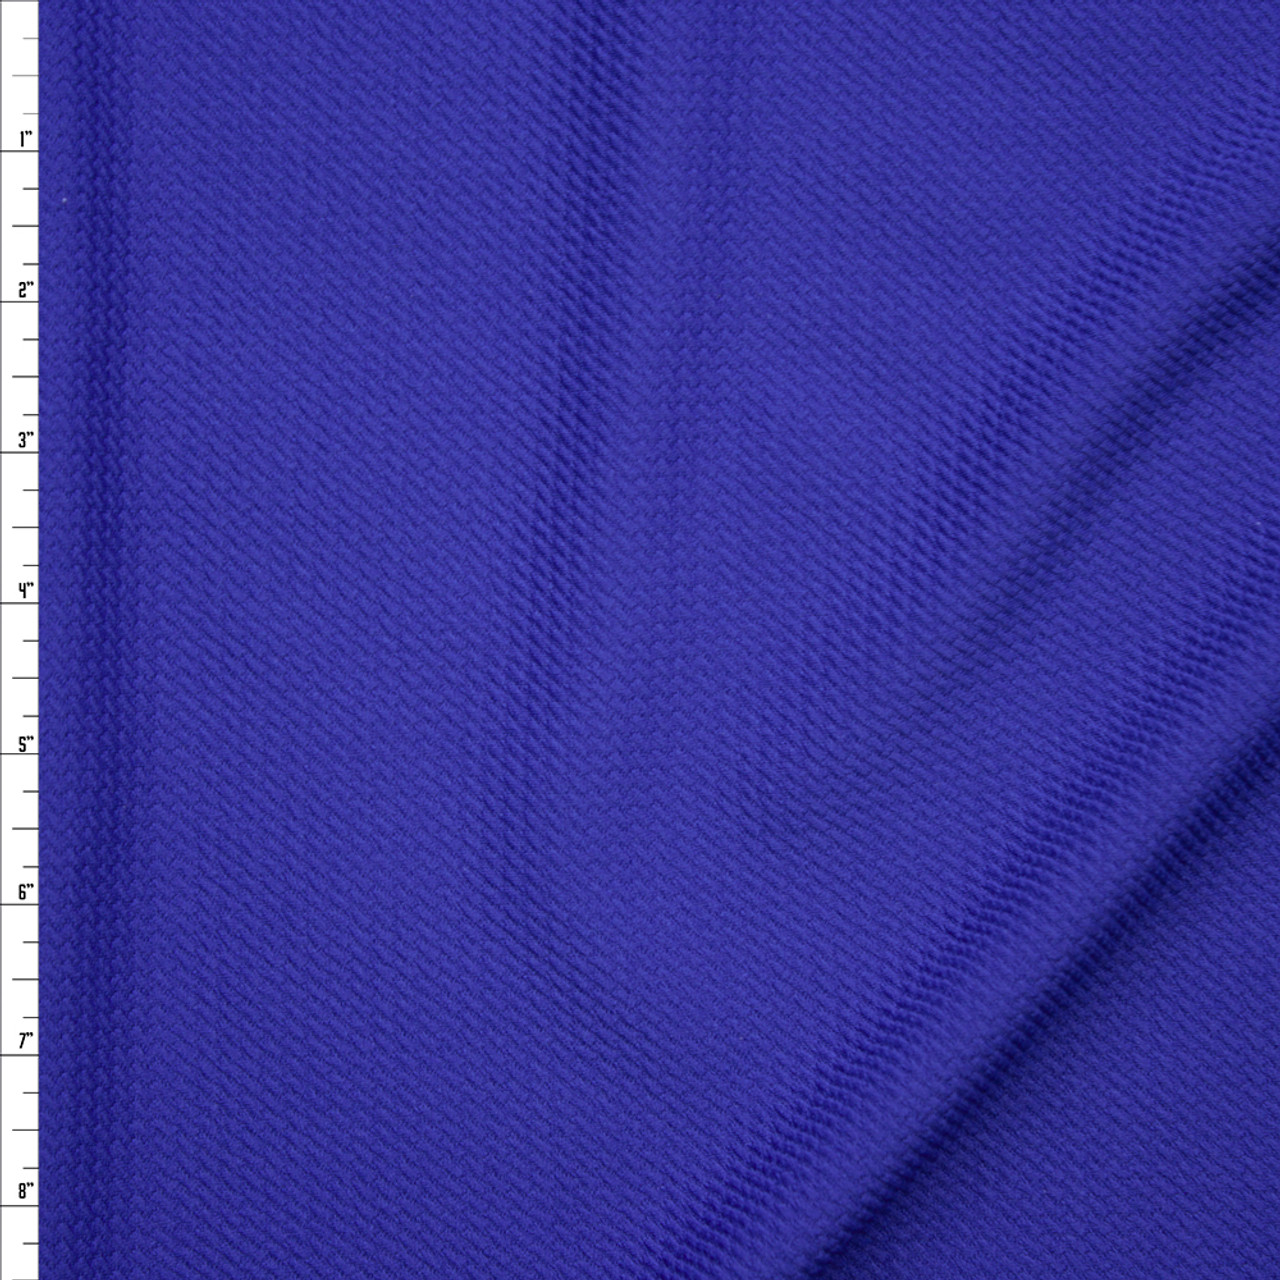 Cali Fabrics Solid Royal Blue Braided Texture Liverpool Knit Fabric by